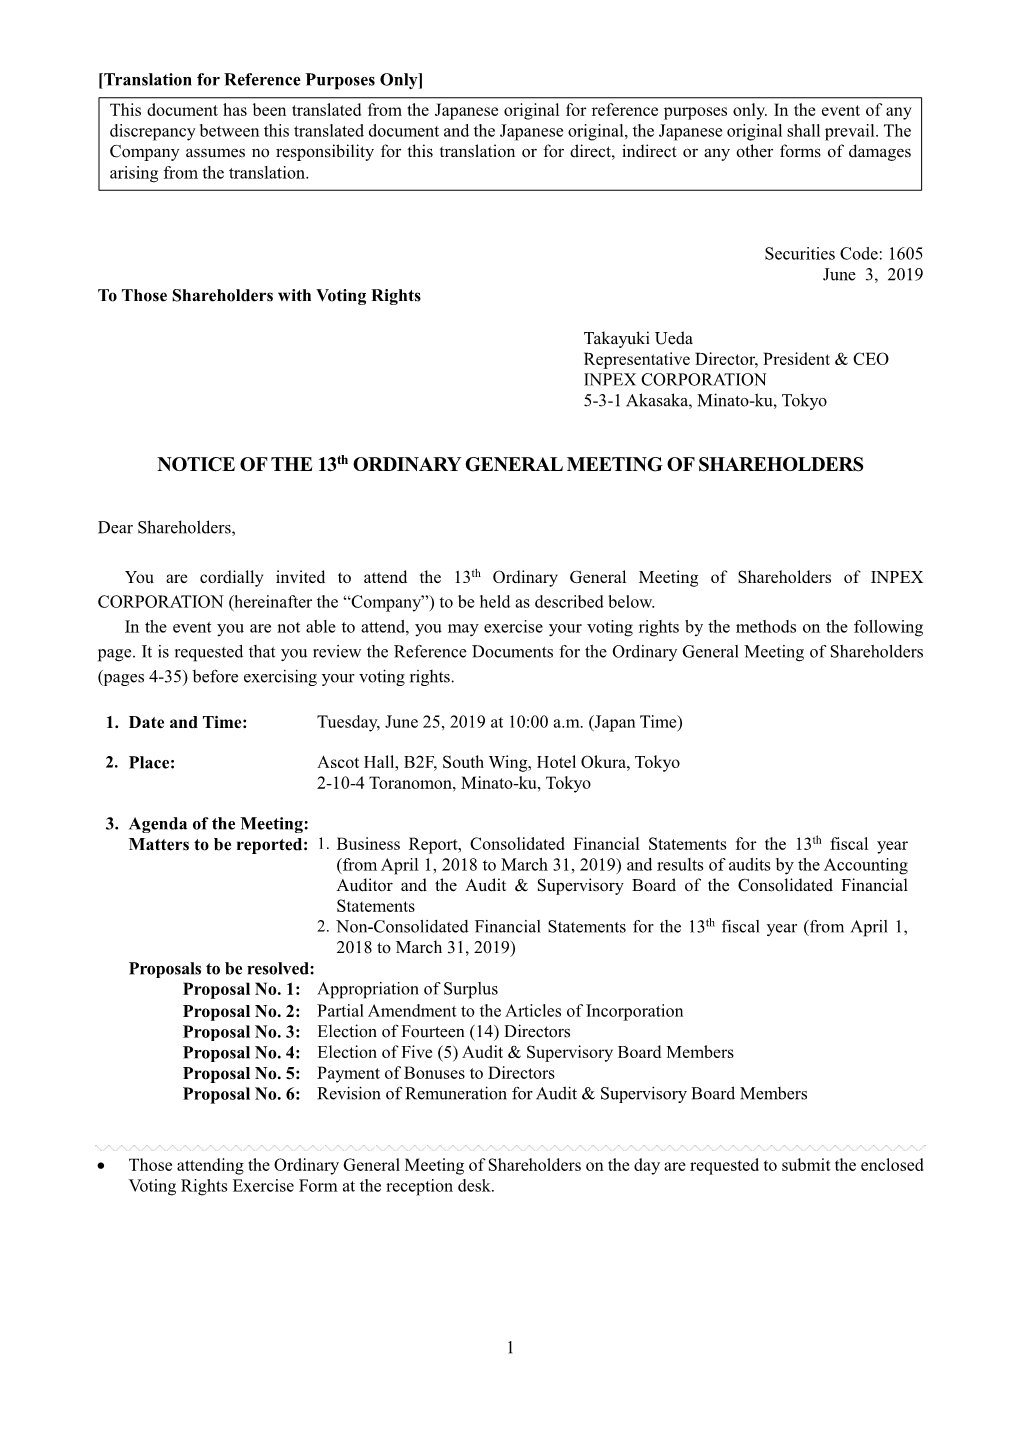 NOTICE of the 13Th ORDINARY GENERAL MEETING of SHAREHOLDERS